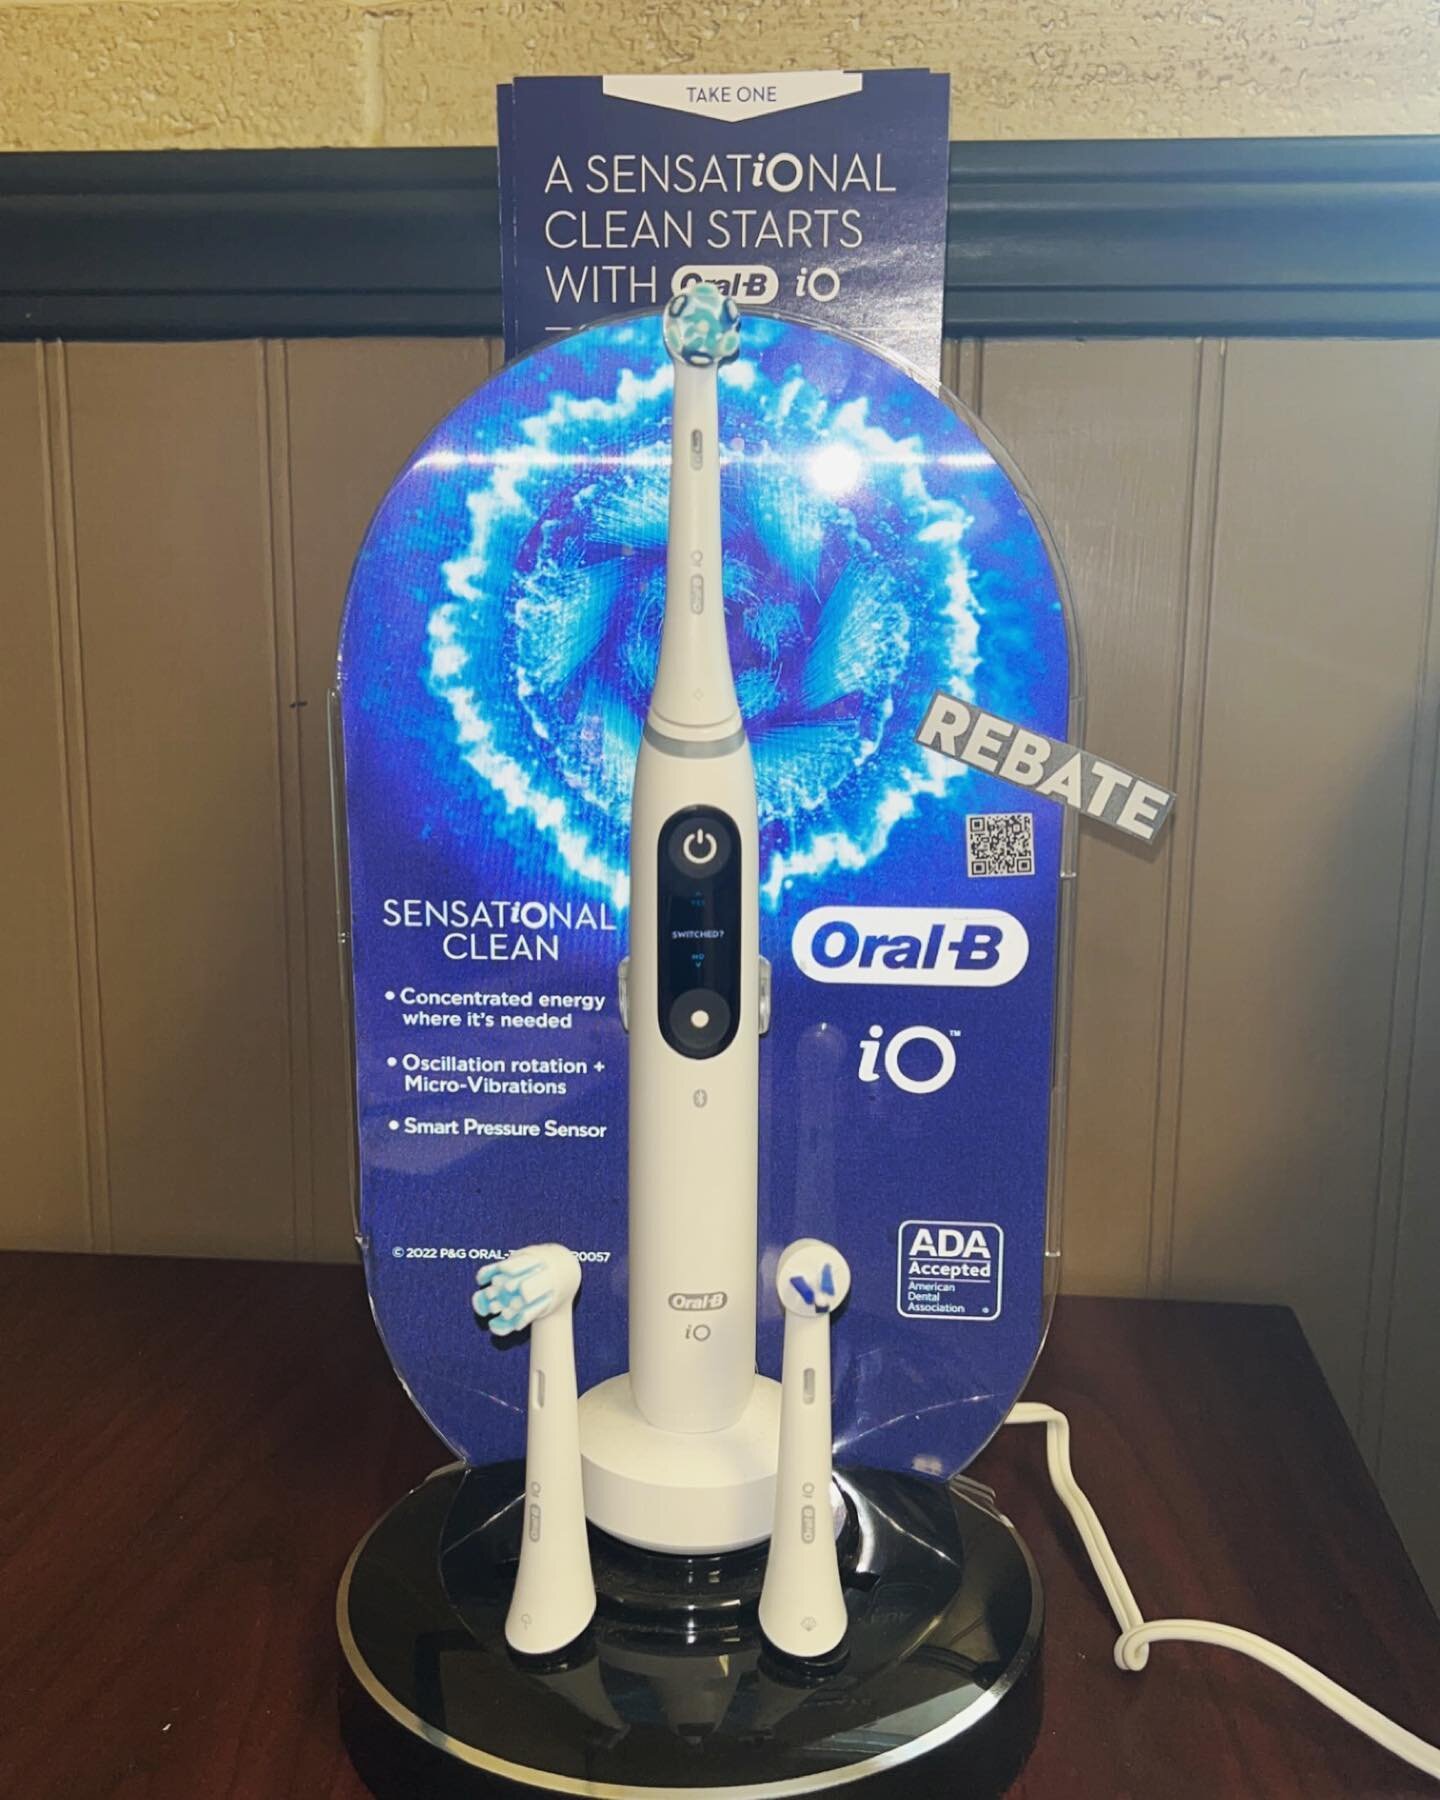 Last chance to enter!! Win this amazing toothbrush or 100$ Amazon card! We will be drawing both winners this Friday! Remember you have to be following BOTH our Facebook and Instagram 😊 #giveaway #oralb #amazon #bearlake